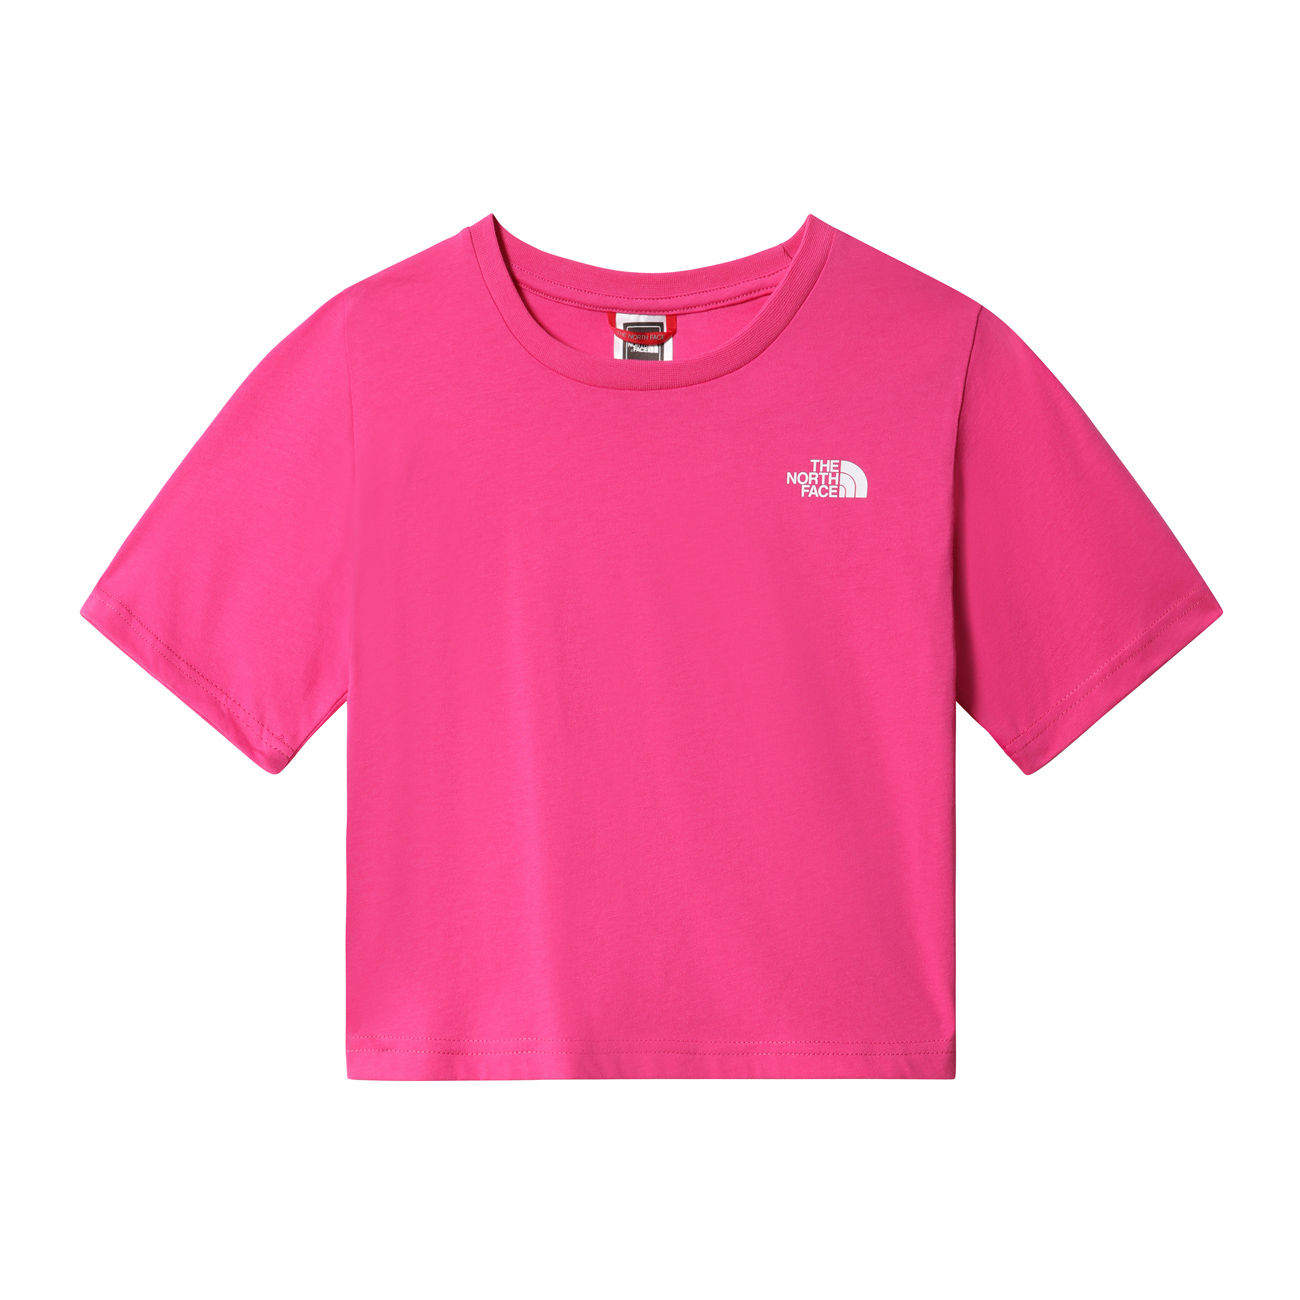 FACE Linaria SIMPLE Store CROPPED THE NORTH | Pink T-SHIRT Kid Mascheroni DOME